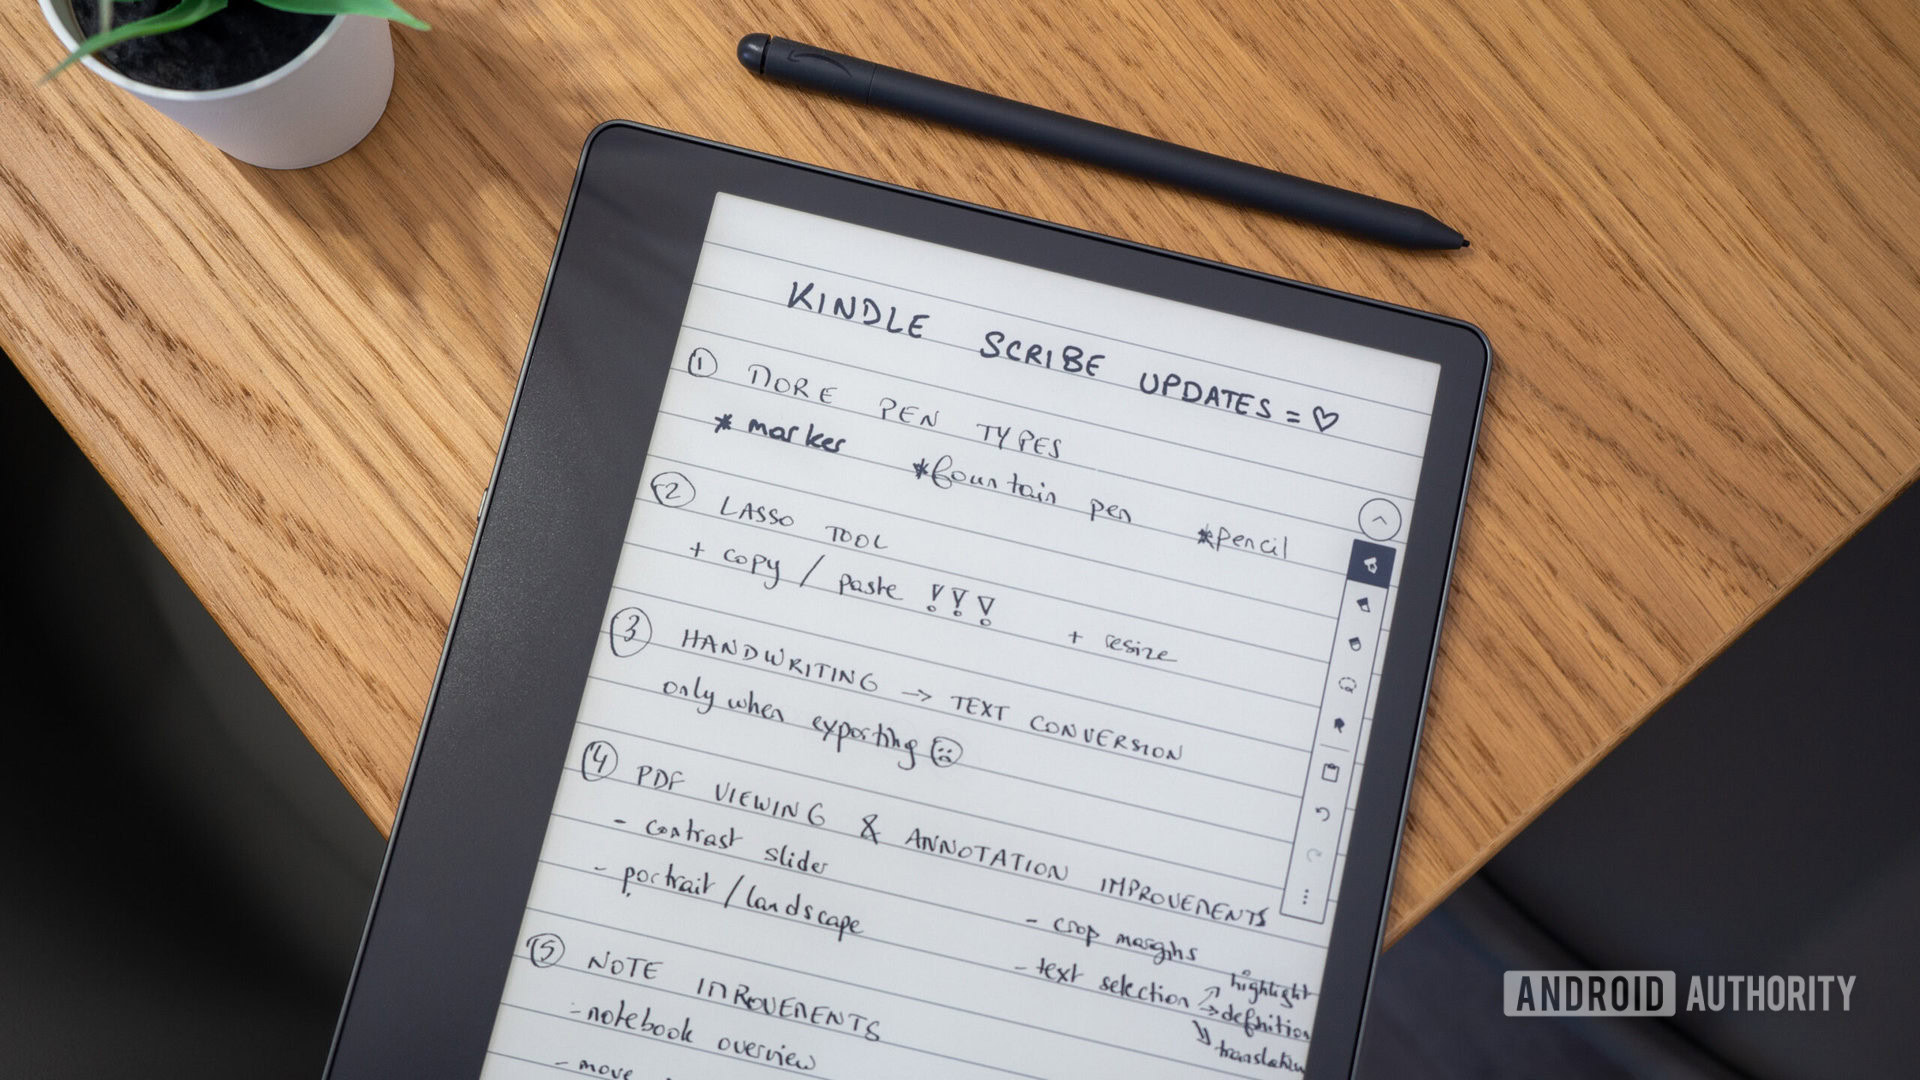 The Kindle Scribe is finally living up to its note-taking potential